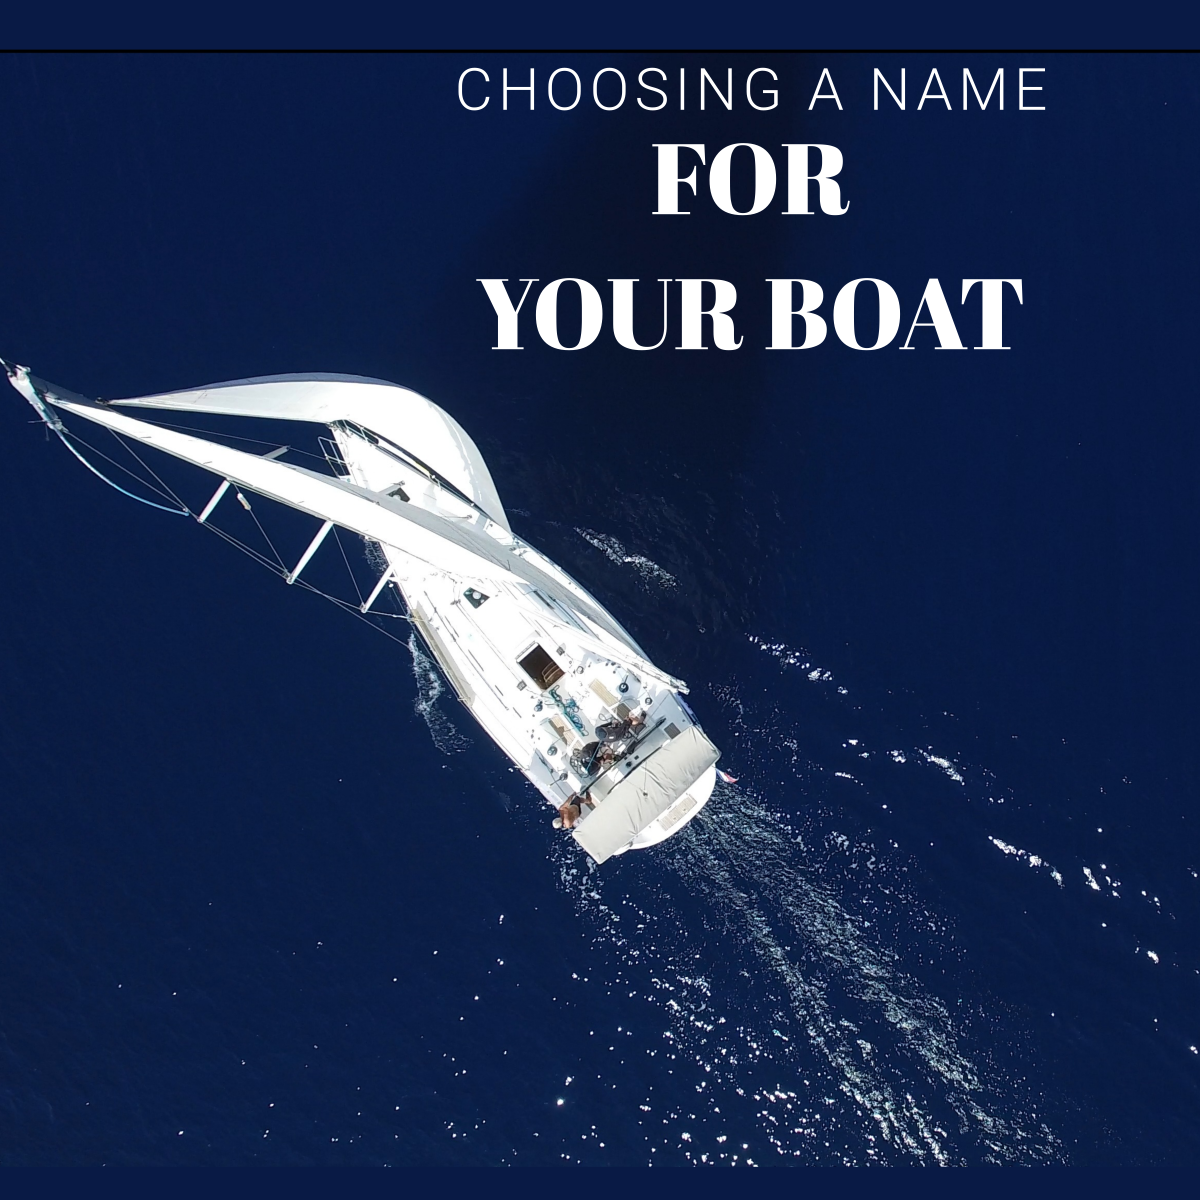 Every special boat deserves a unique name. 